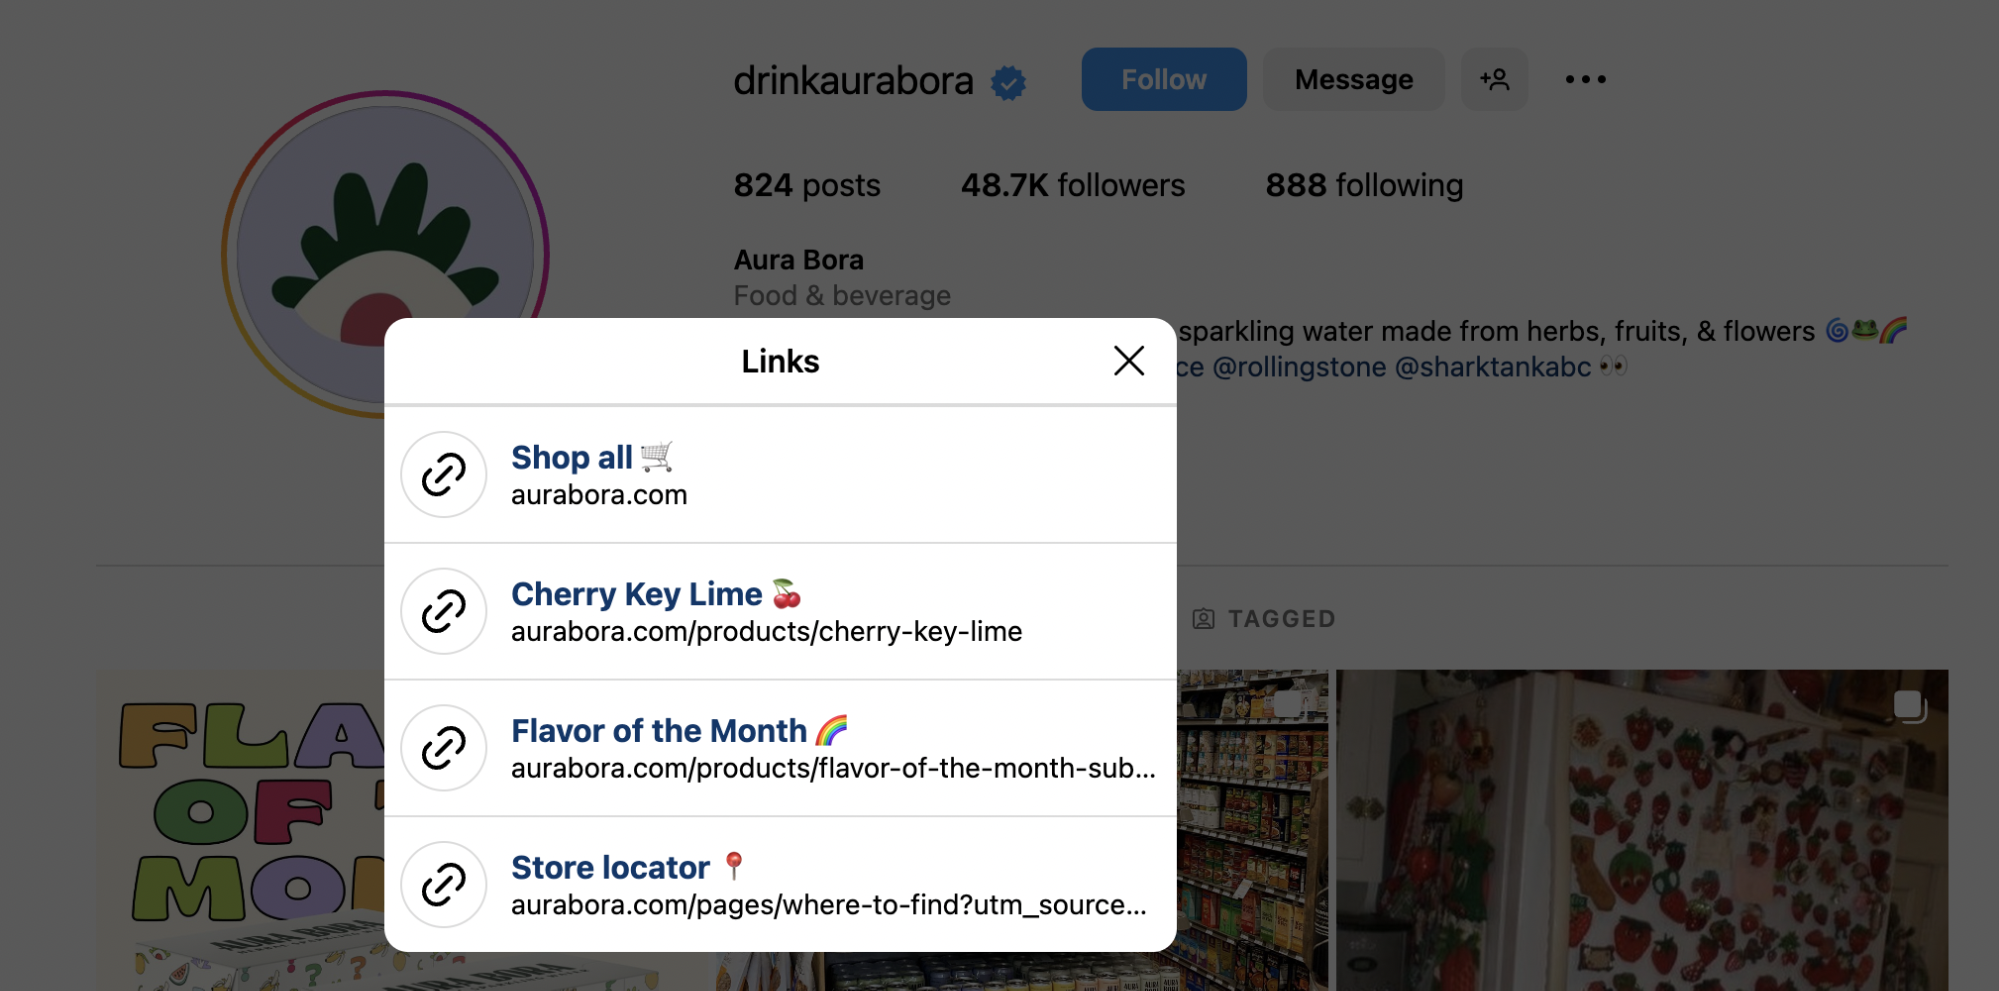 Screenshot of the links from Aura Bora’s Instagram bio. Links direct shoppers to the brand’s online store, its flavor of the month, and a store locator.